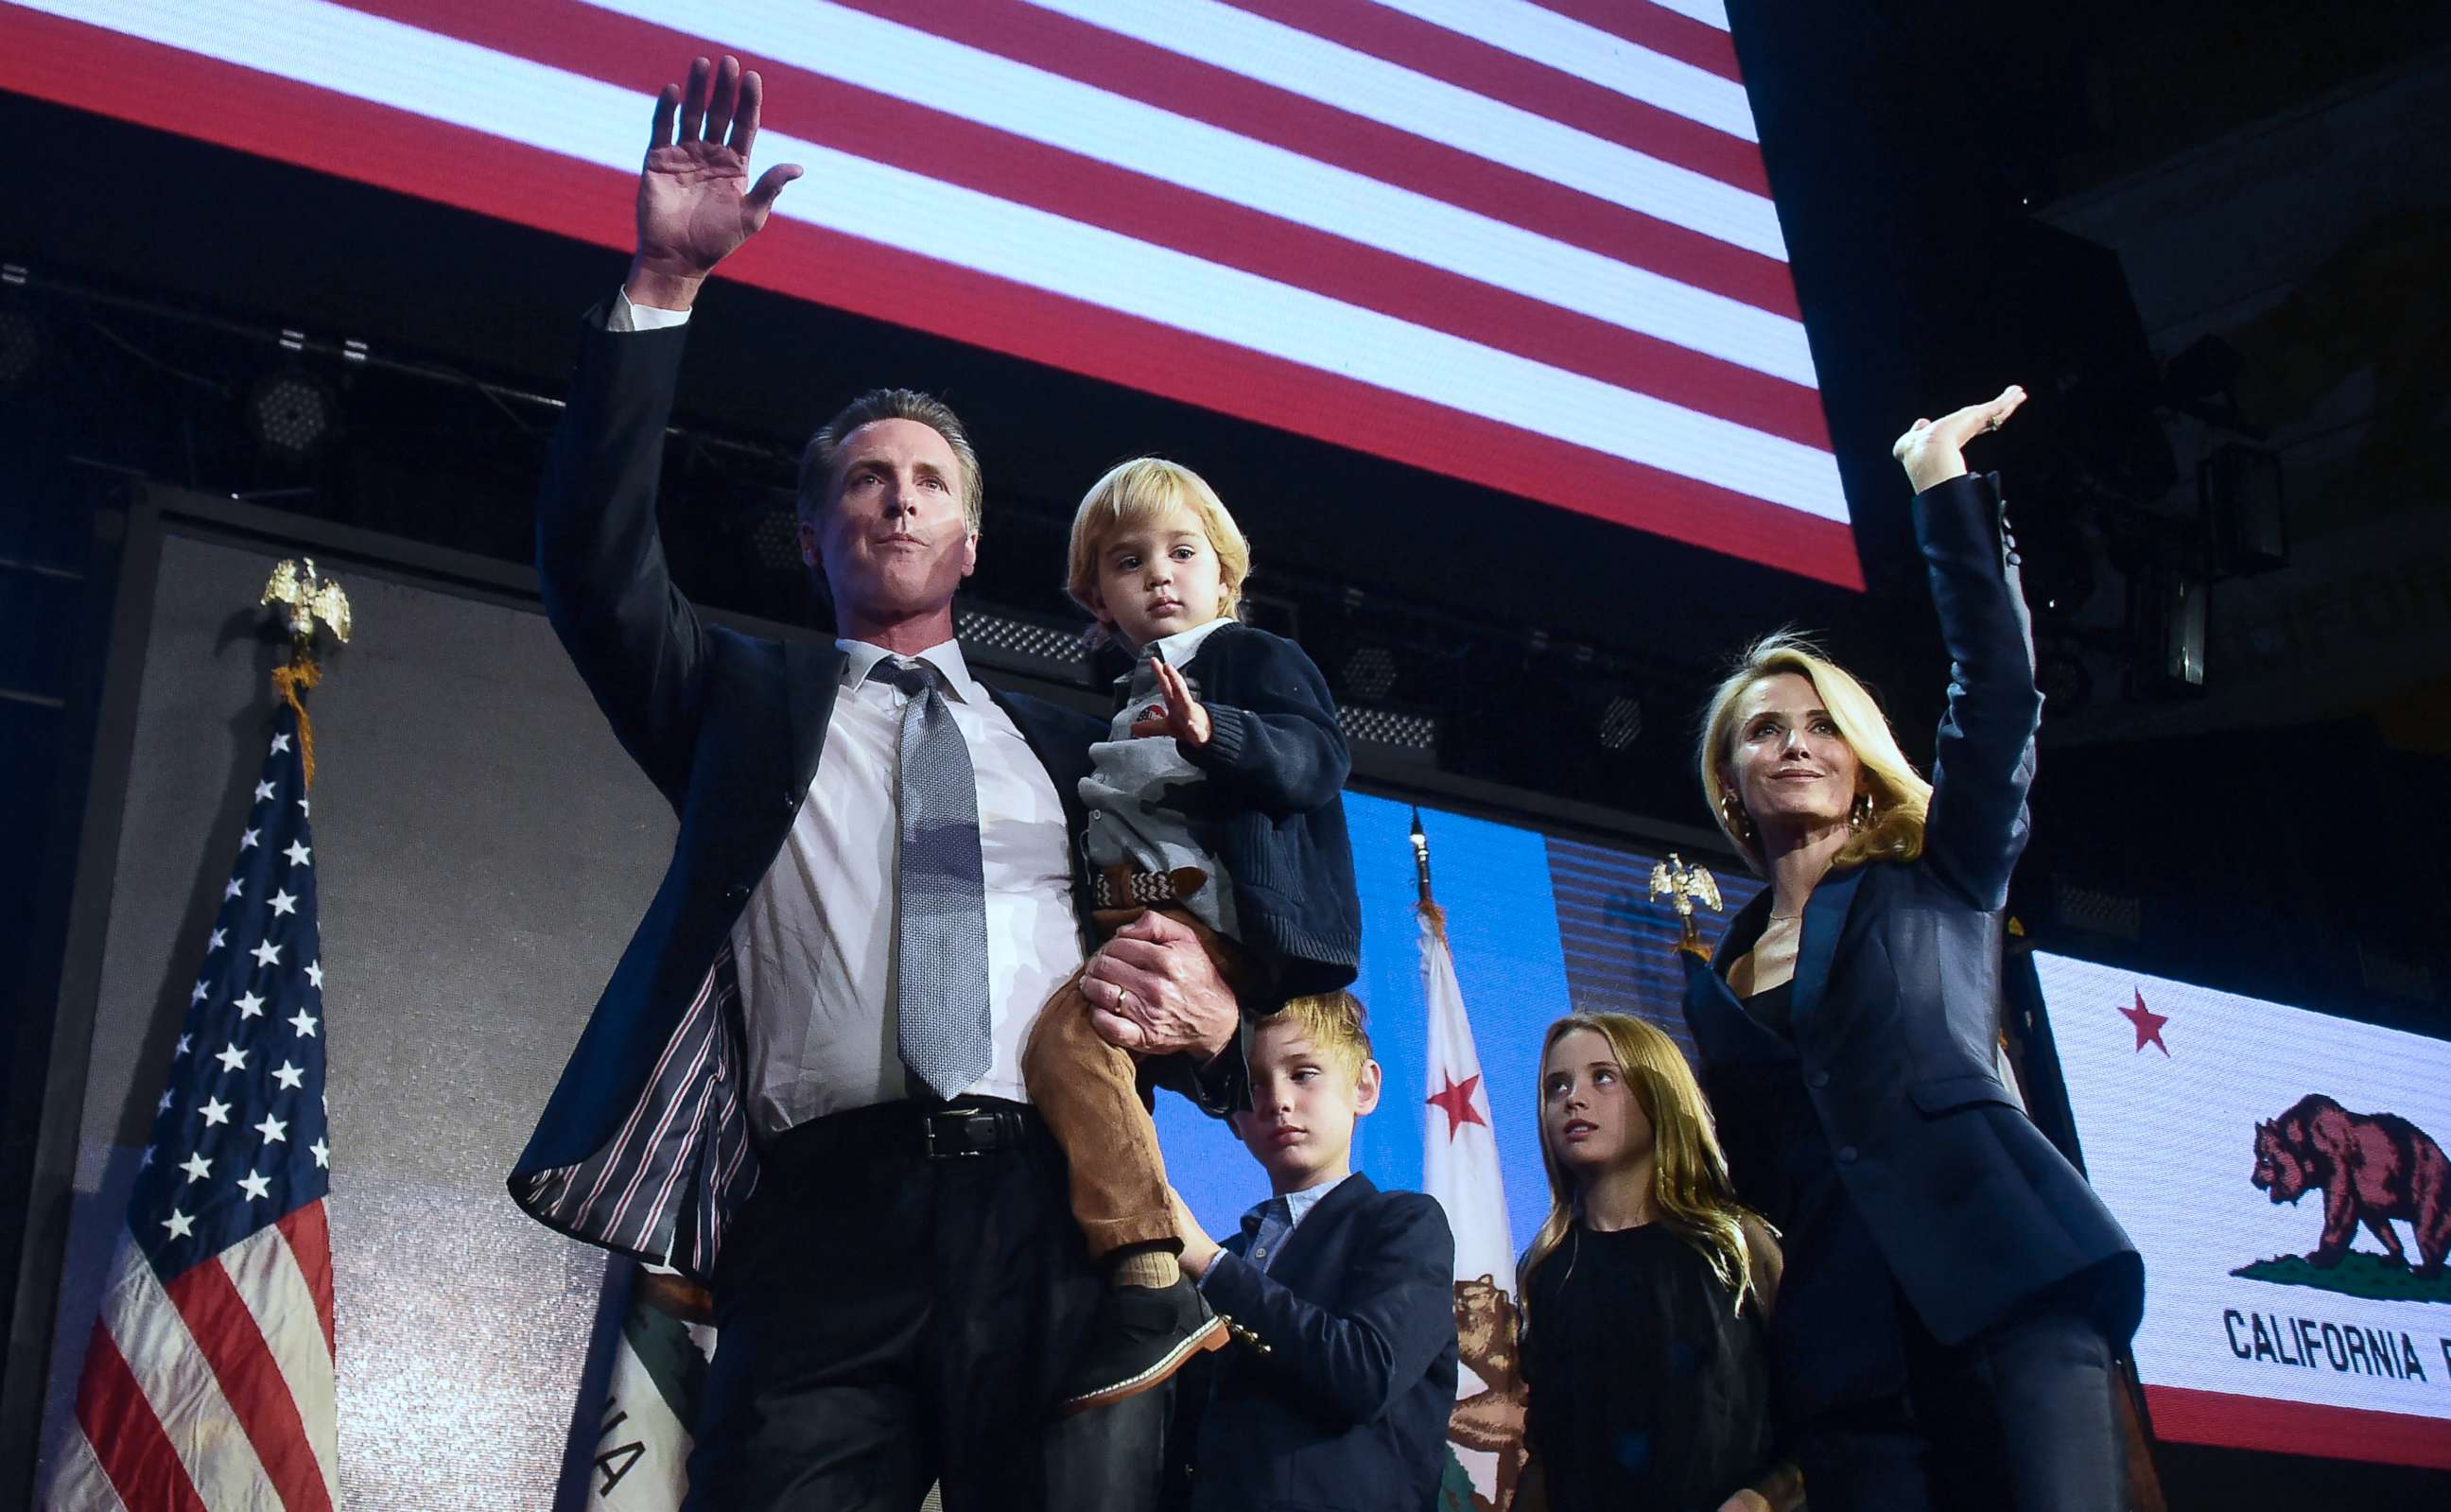 PHOTO: California's Democratic gubernatorial candidate Gavin Newsom and his family wave to supporters from the stage at his election night watch party in Los Angeles, Nov, 6, 2018.